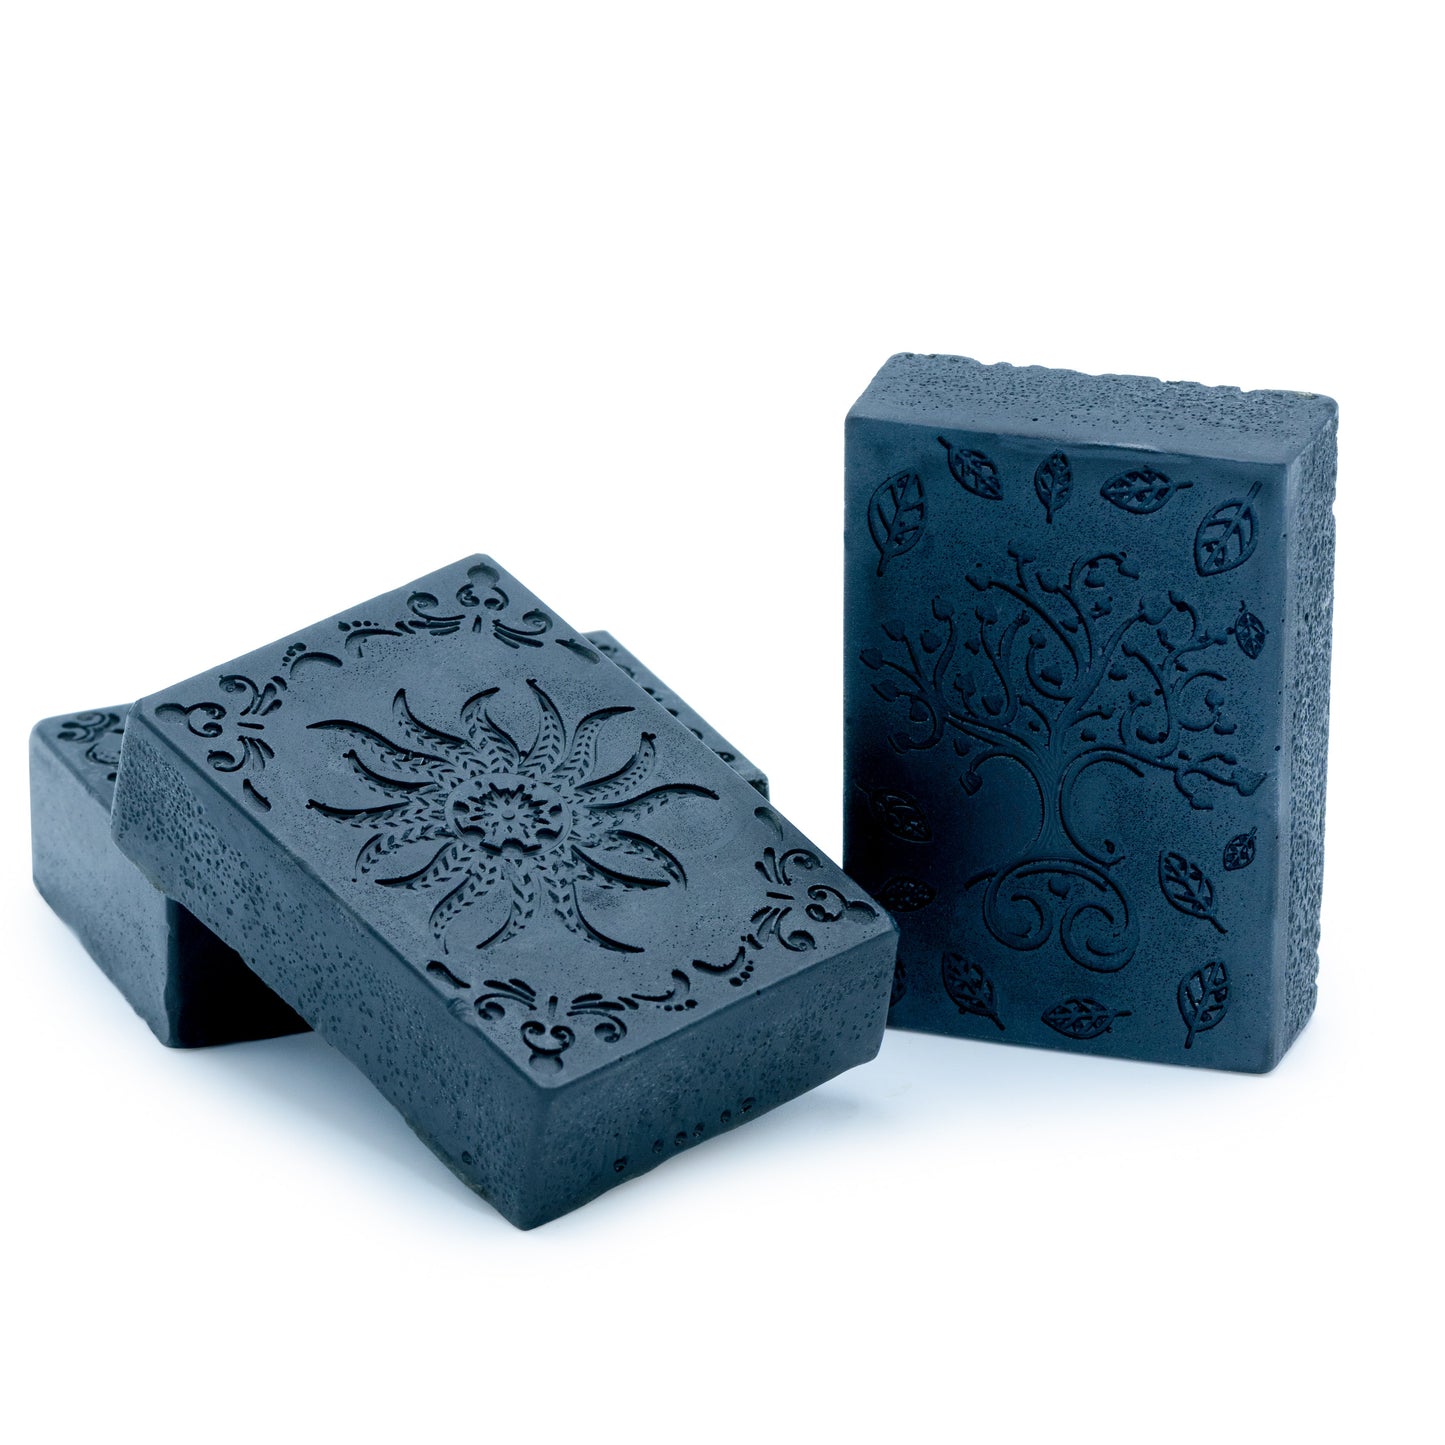 Activated Charcoal Body Cleansing Bar(Get 2) - Body and Soul Naturally LLC